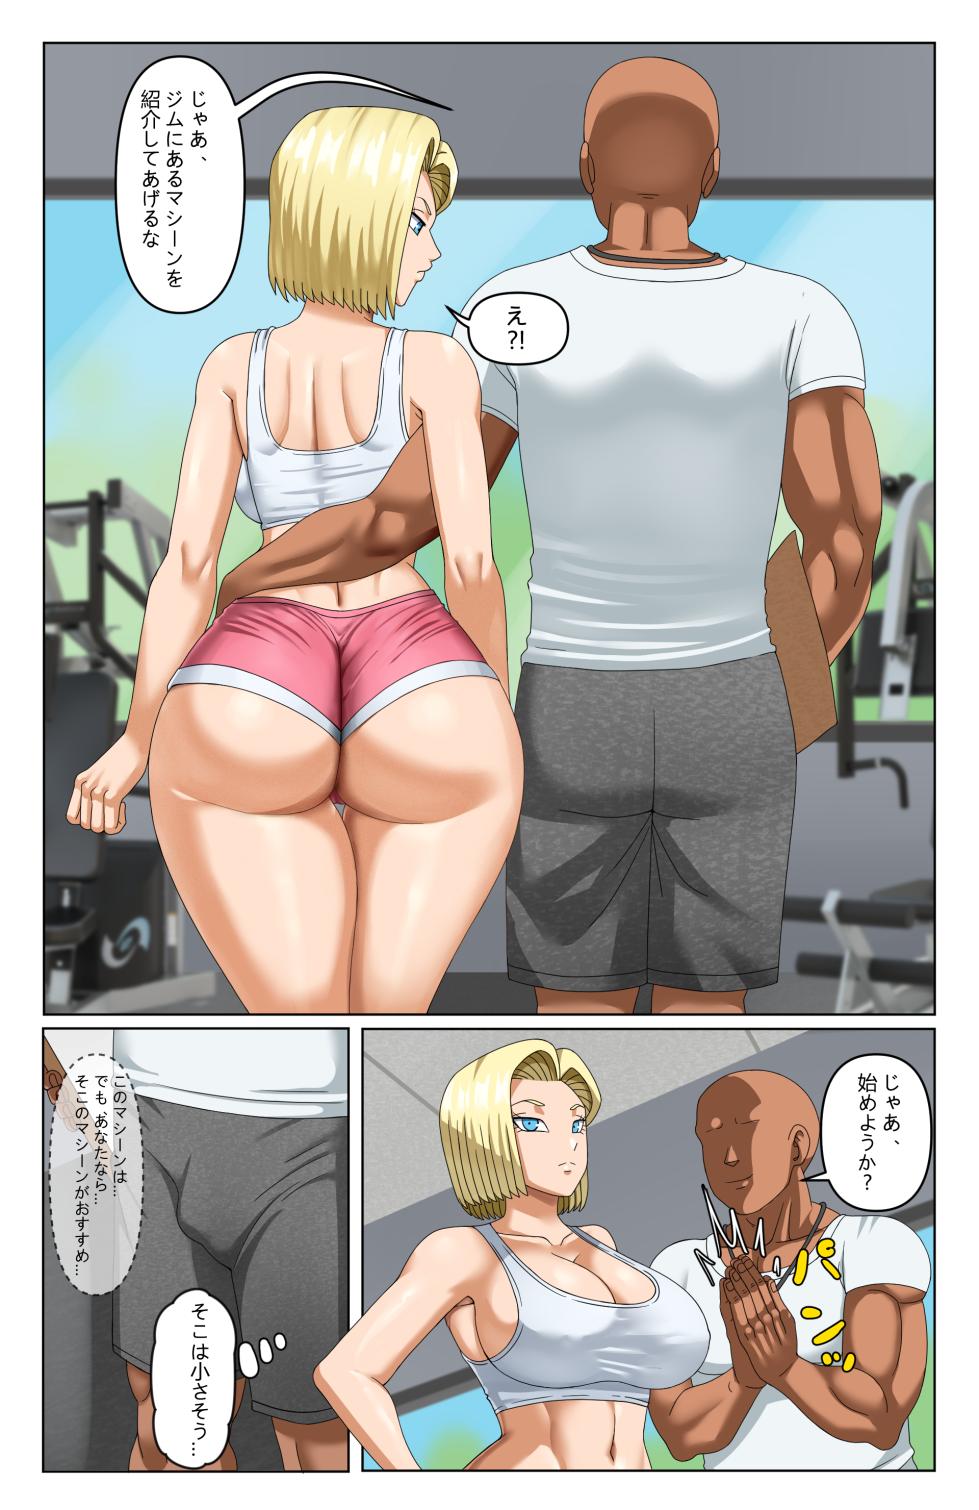 [Pink Pawg] Android 18 NTR 3 (Dragon Ball Super) - Page 4